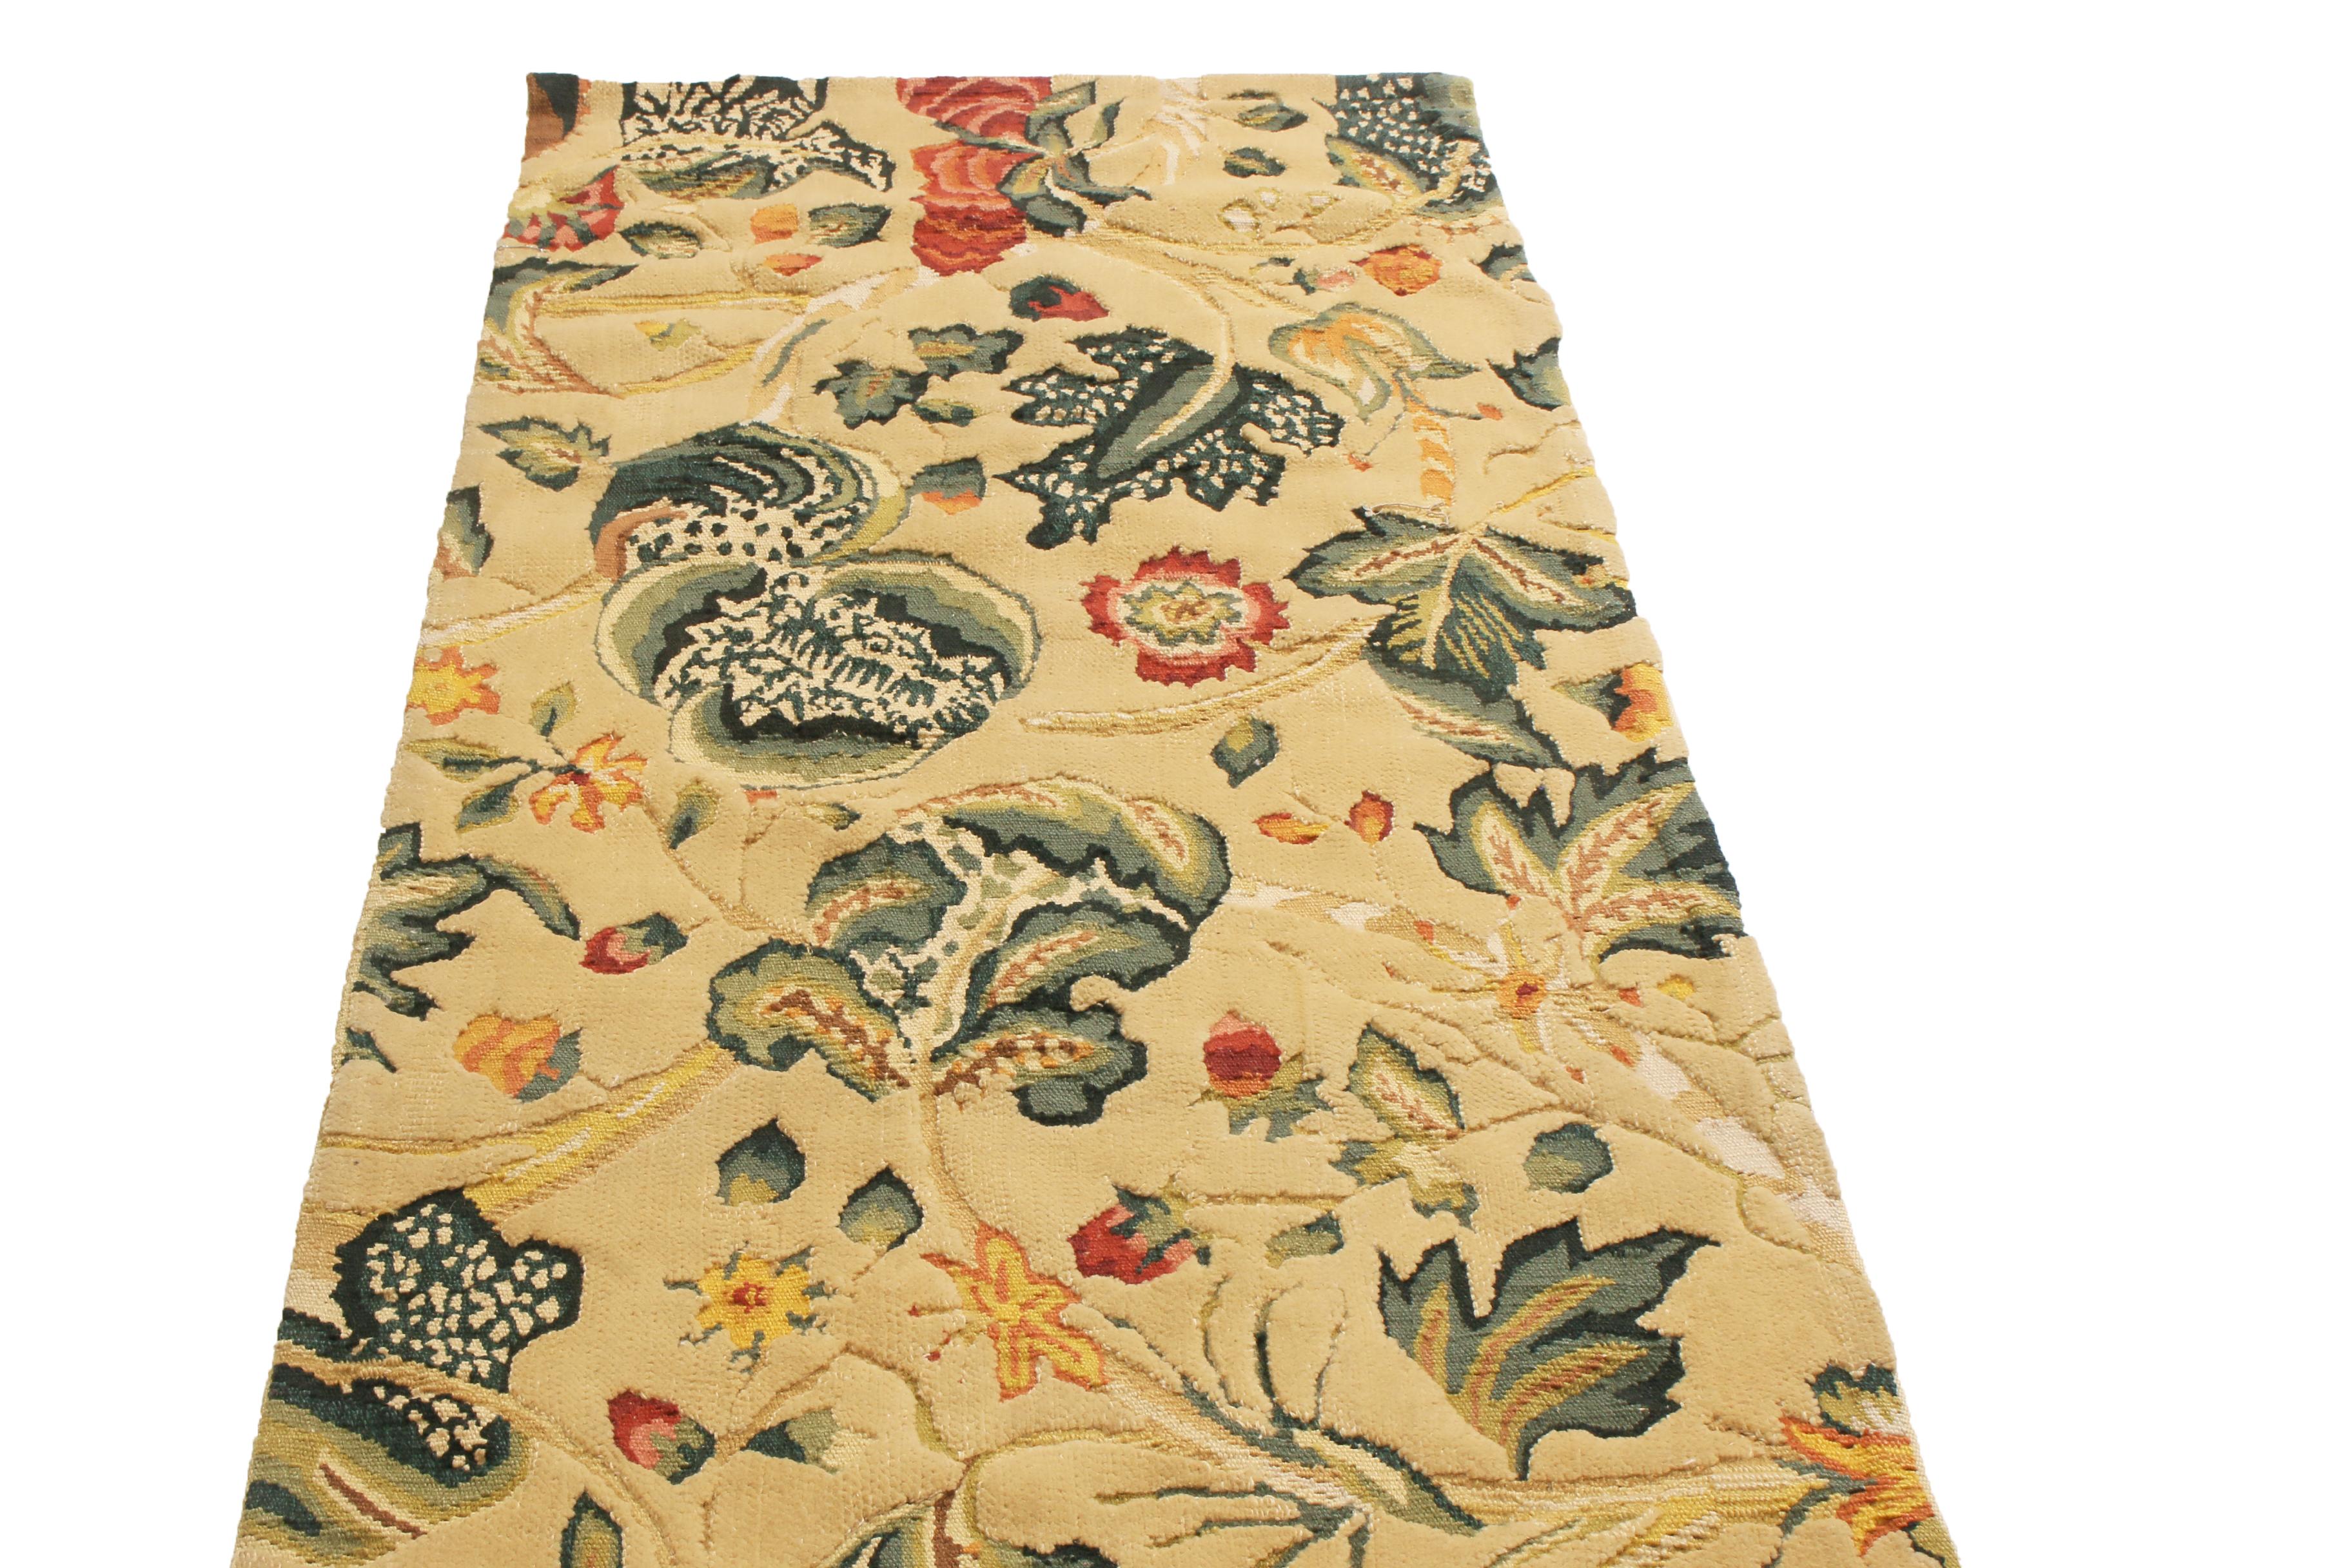 Originating from China, this hand knotted floral runner was inspired by antique and vintage Tudor floral designs, embracing a borderless, all over field design with sweapping curvilinear green, red, and golden-yellow floral garlands against a